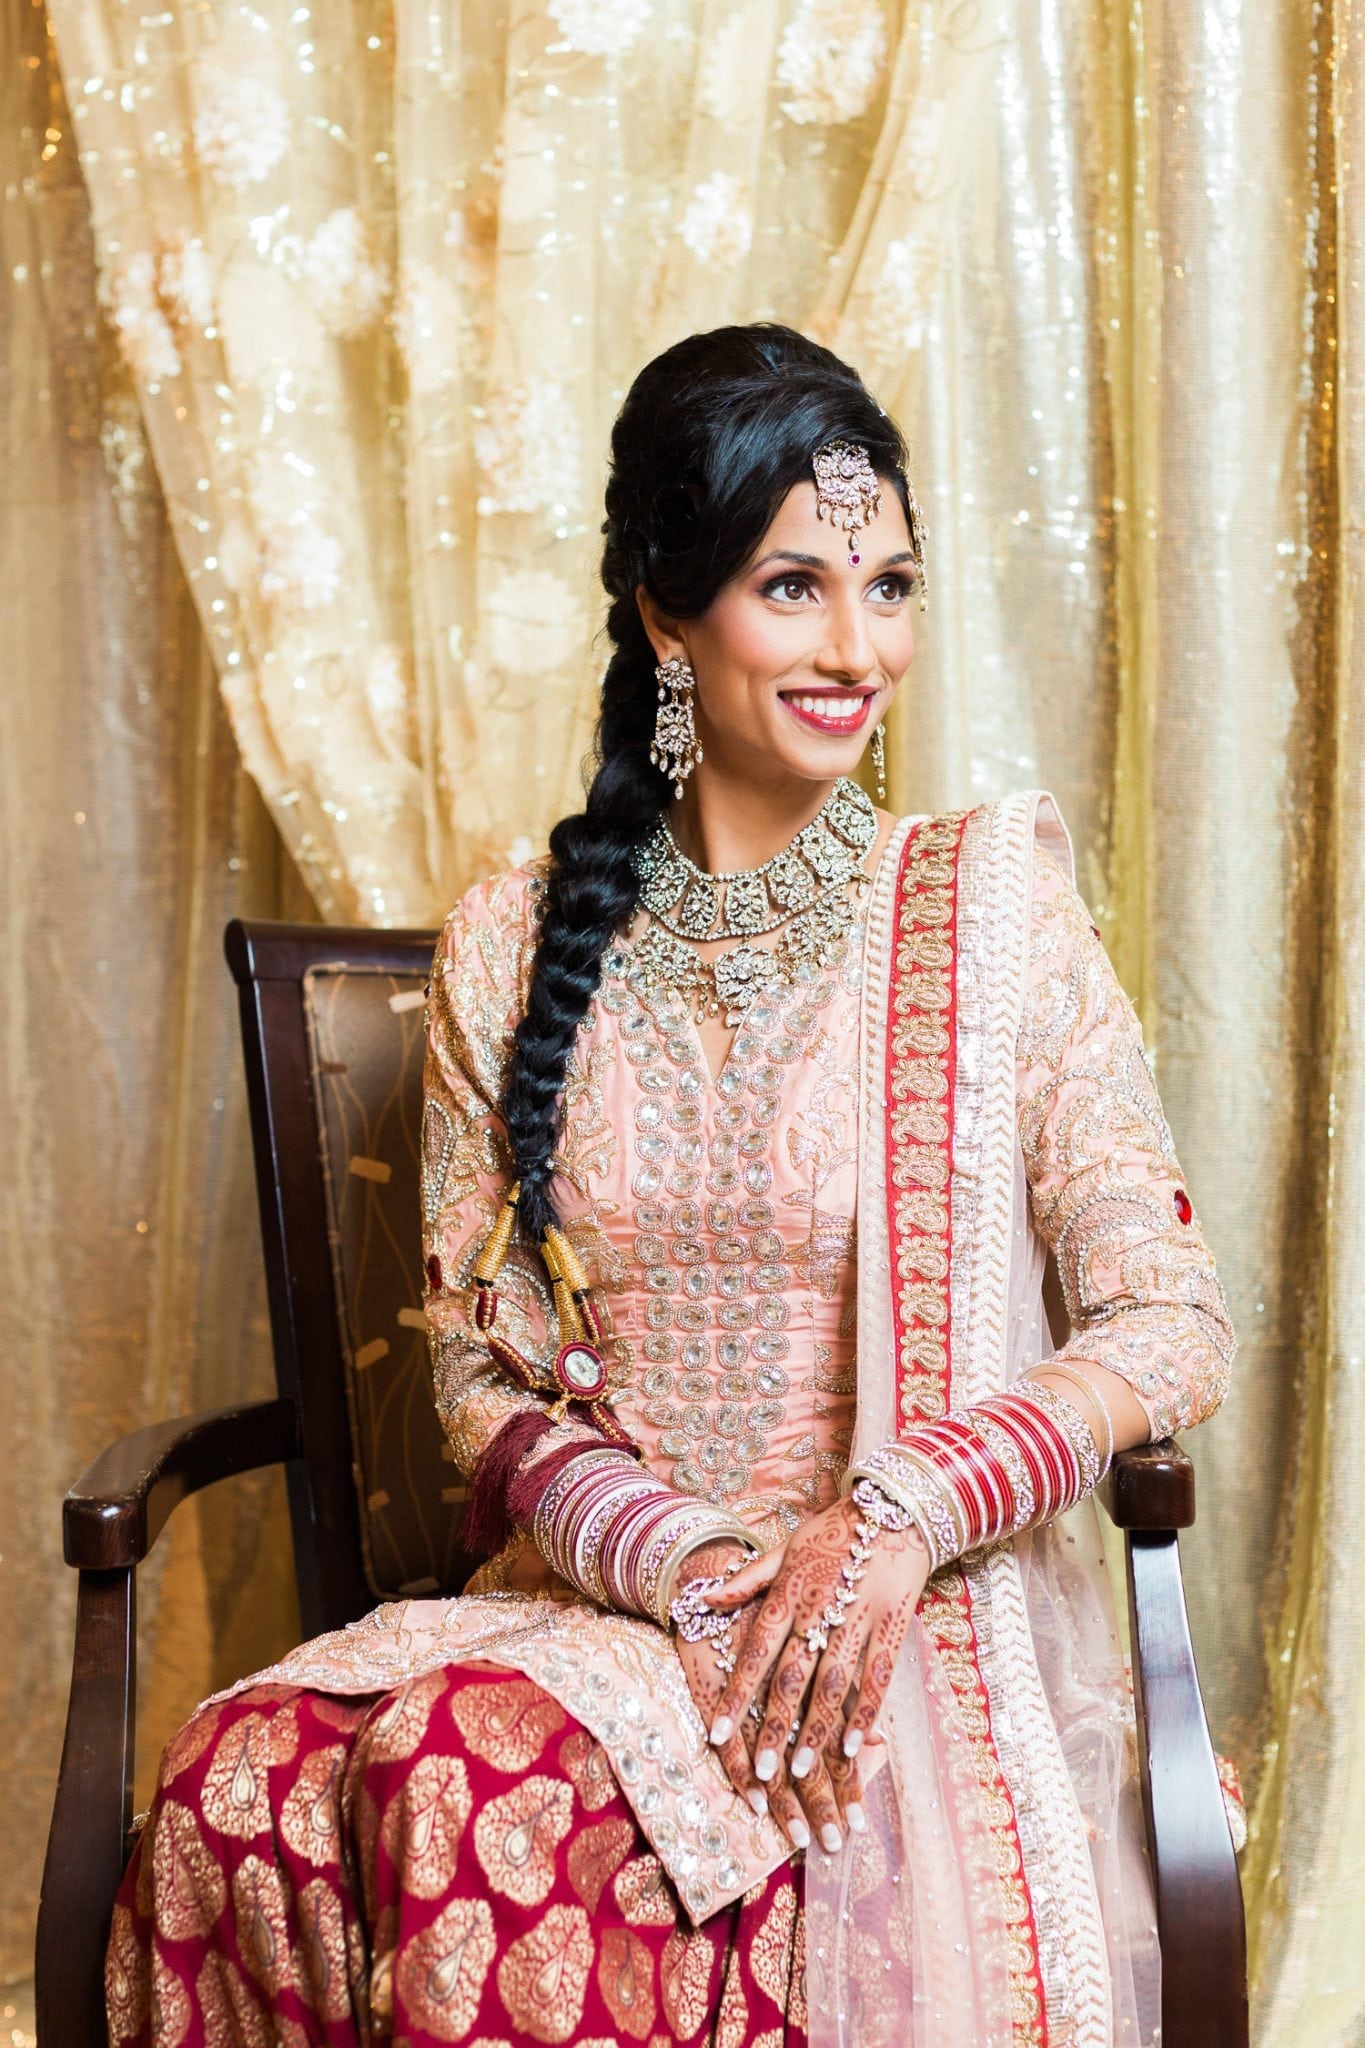 Indian bride getting ready for wedding | Vancouver Indian wedding photographer